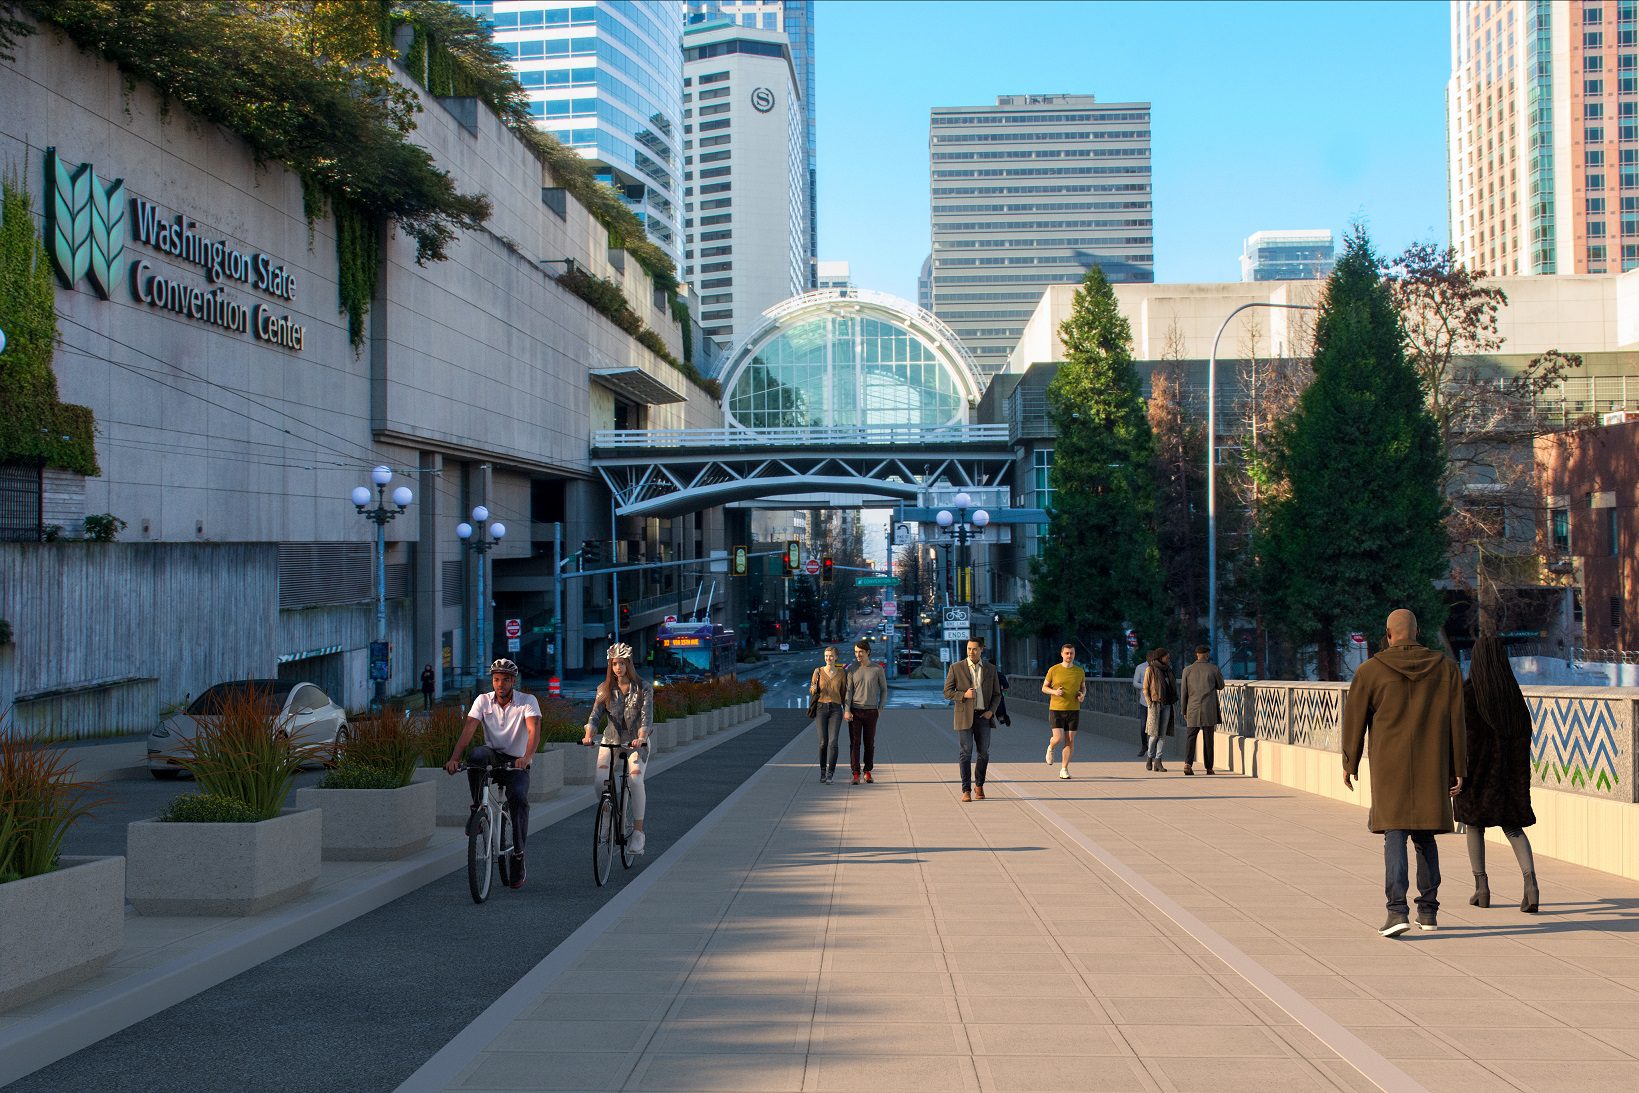 A graphic rendering or visualization of people walking and riding bikes along a large sidewalk and bike area, with large buildings and trees in the background.